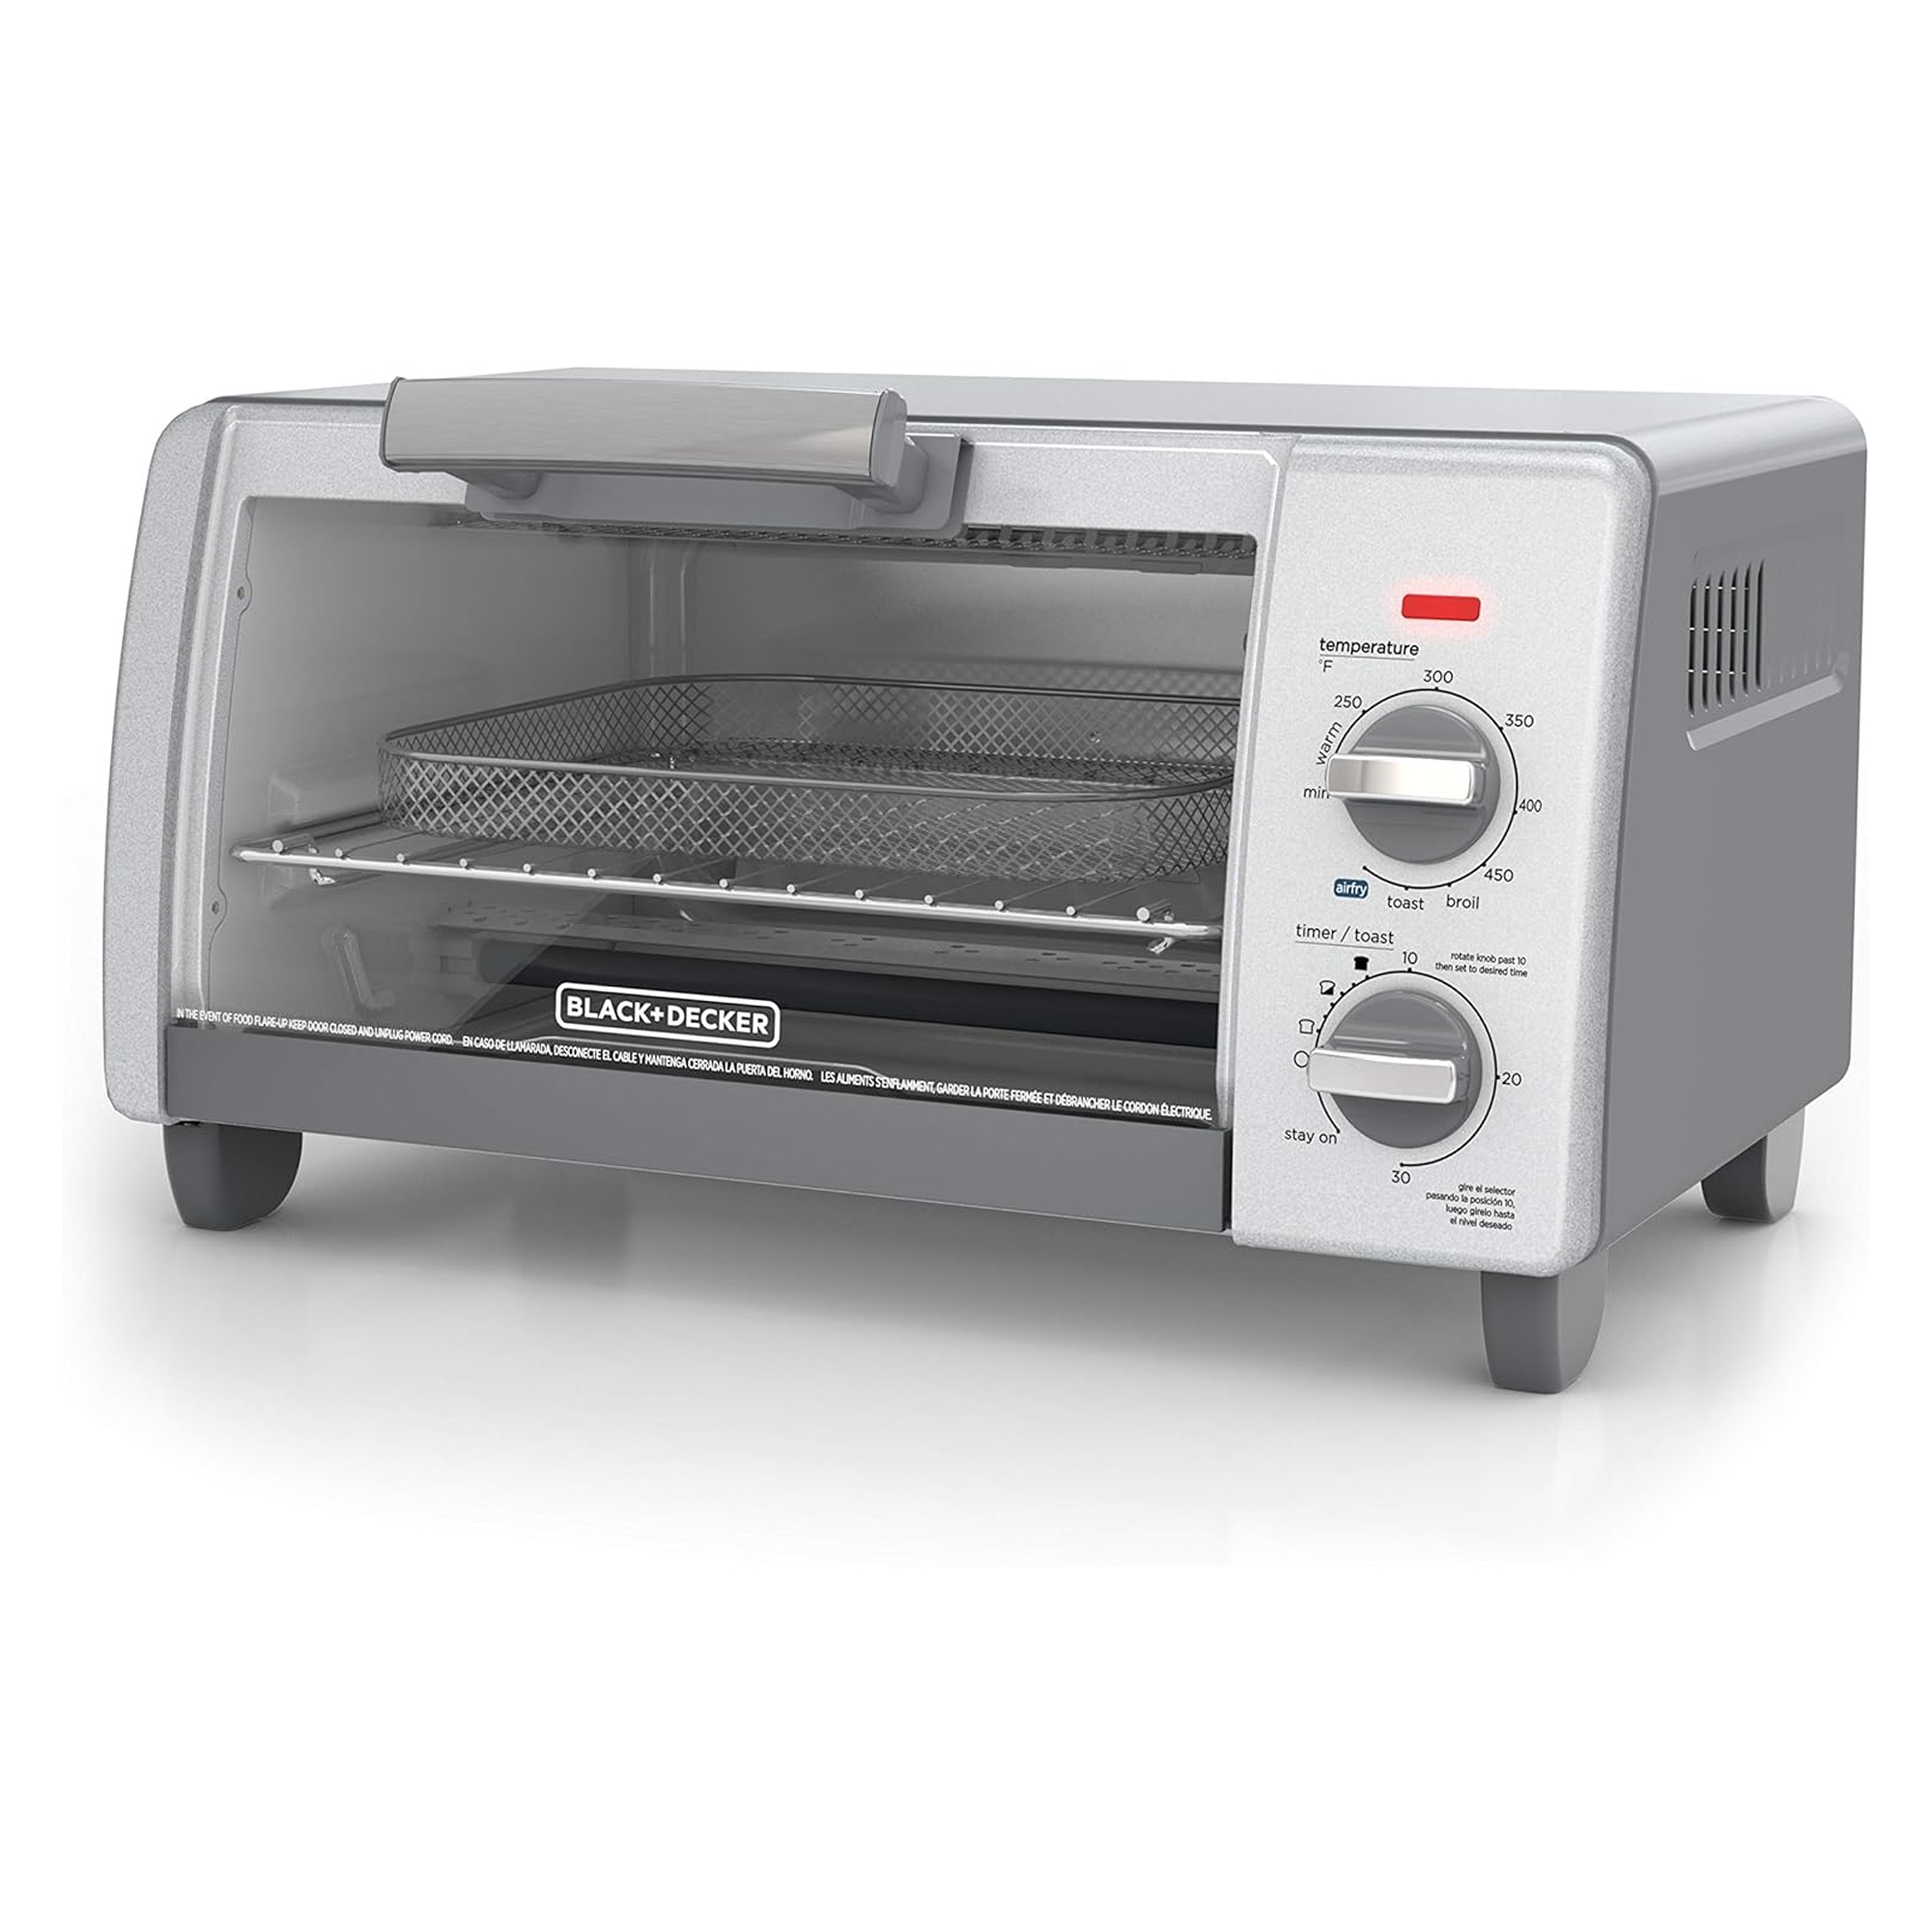 BD 4SL AIRFRY & TOASTER OVEN - image 1 of 2